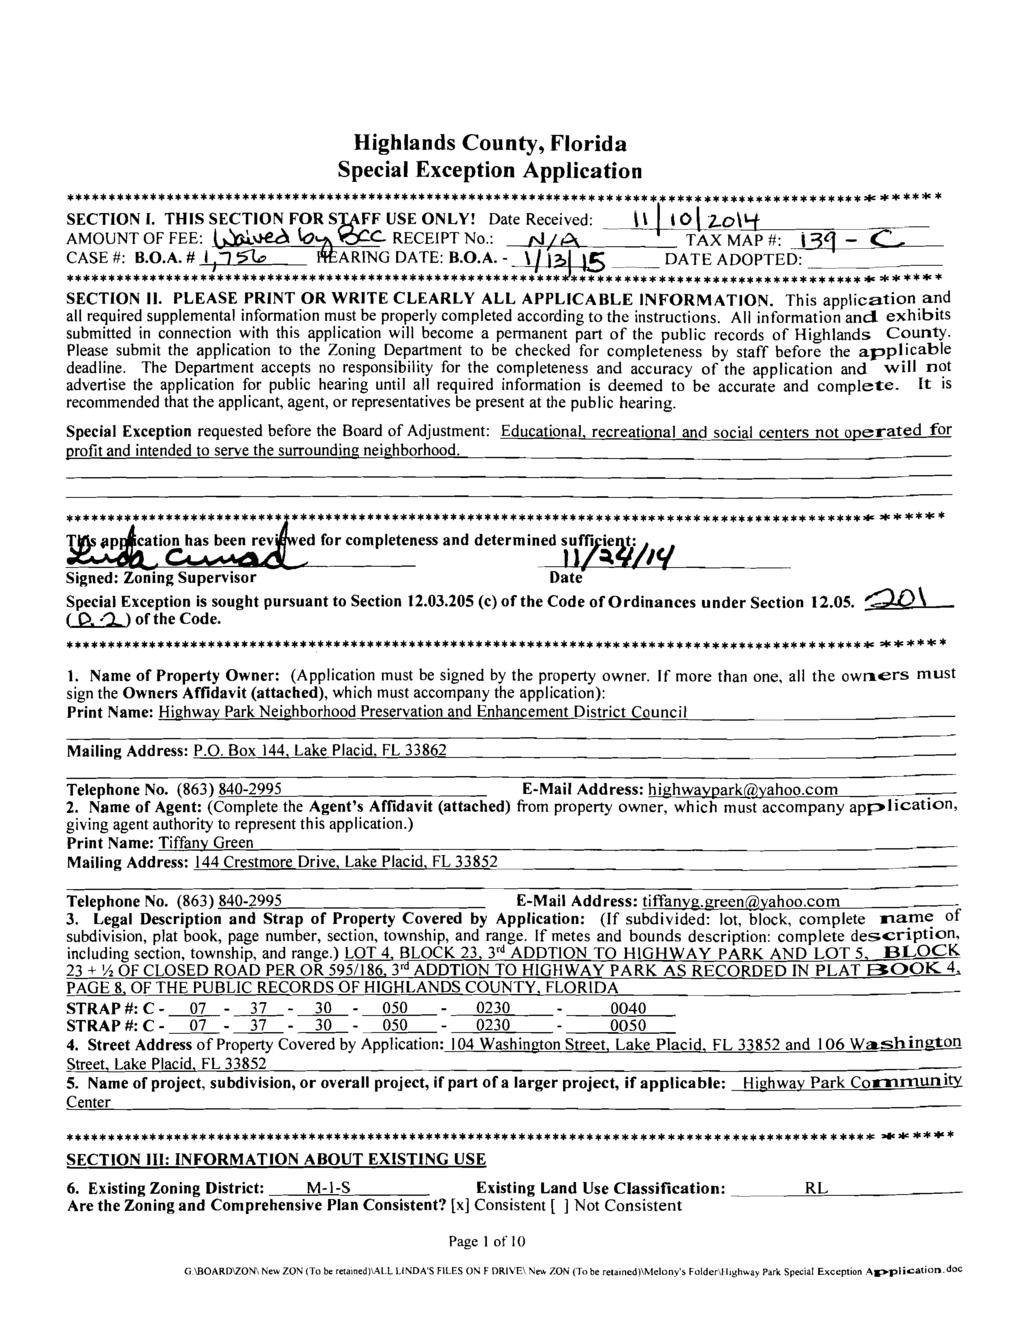 Highlands County, Florida Special Exception Application... &- SECTION I. THIS SECTION FOR S FF USE ONLY! Date Received: - AMOUNT OF FEE: ud -* b RECEIPT No.: d/@~ TAX MAP #: ARlNG DATE: B.O.A. - \ DATE ADOPTED: CASE #: B.